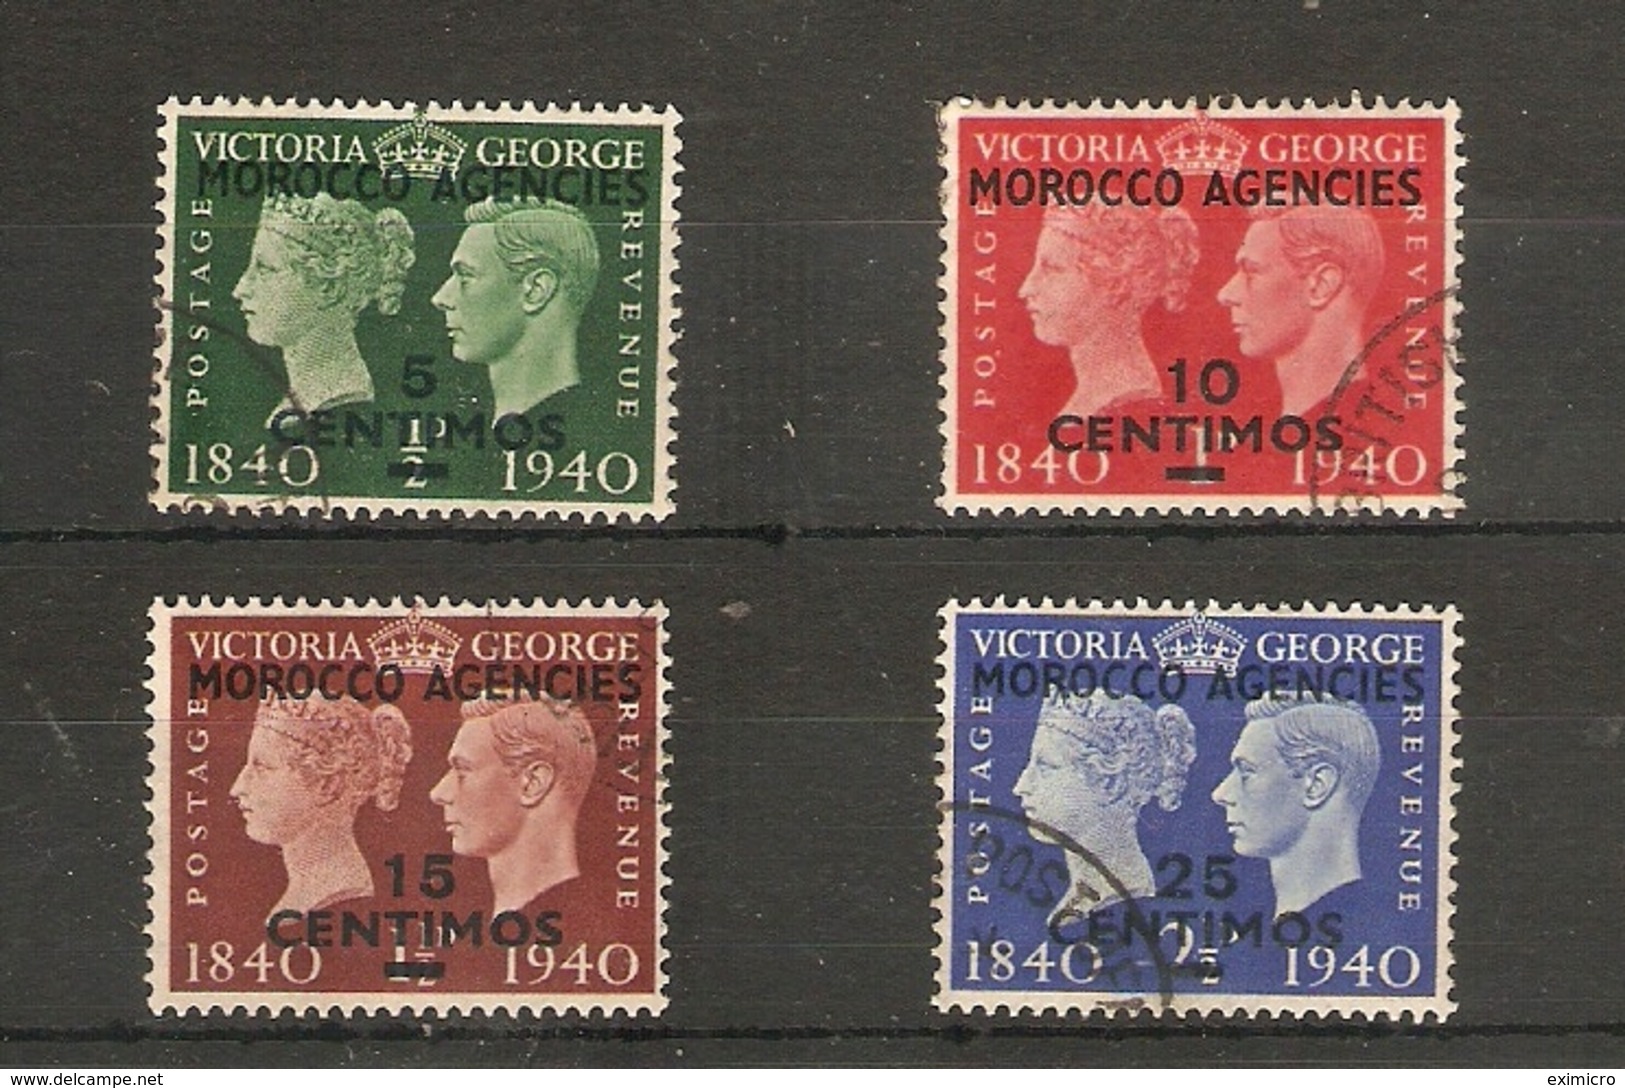 MOROCCO AGENCIES (SPANISH CURRENCY) 1940 STAMP CENTENARY SET SG 172/175 FINE USED Cat £17 - Morocco Agencies / Tangier (...-1958)